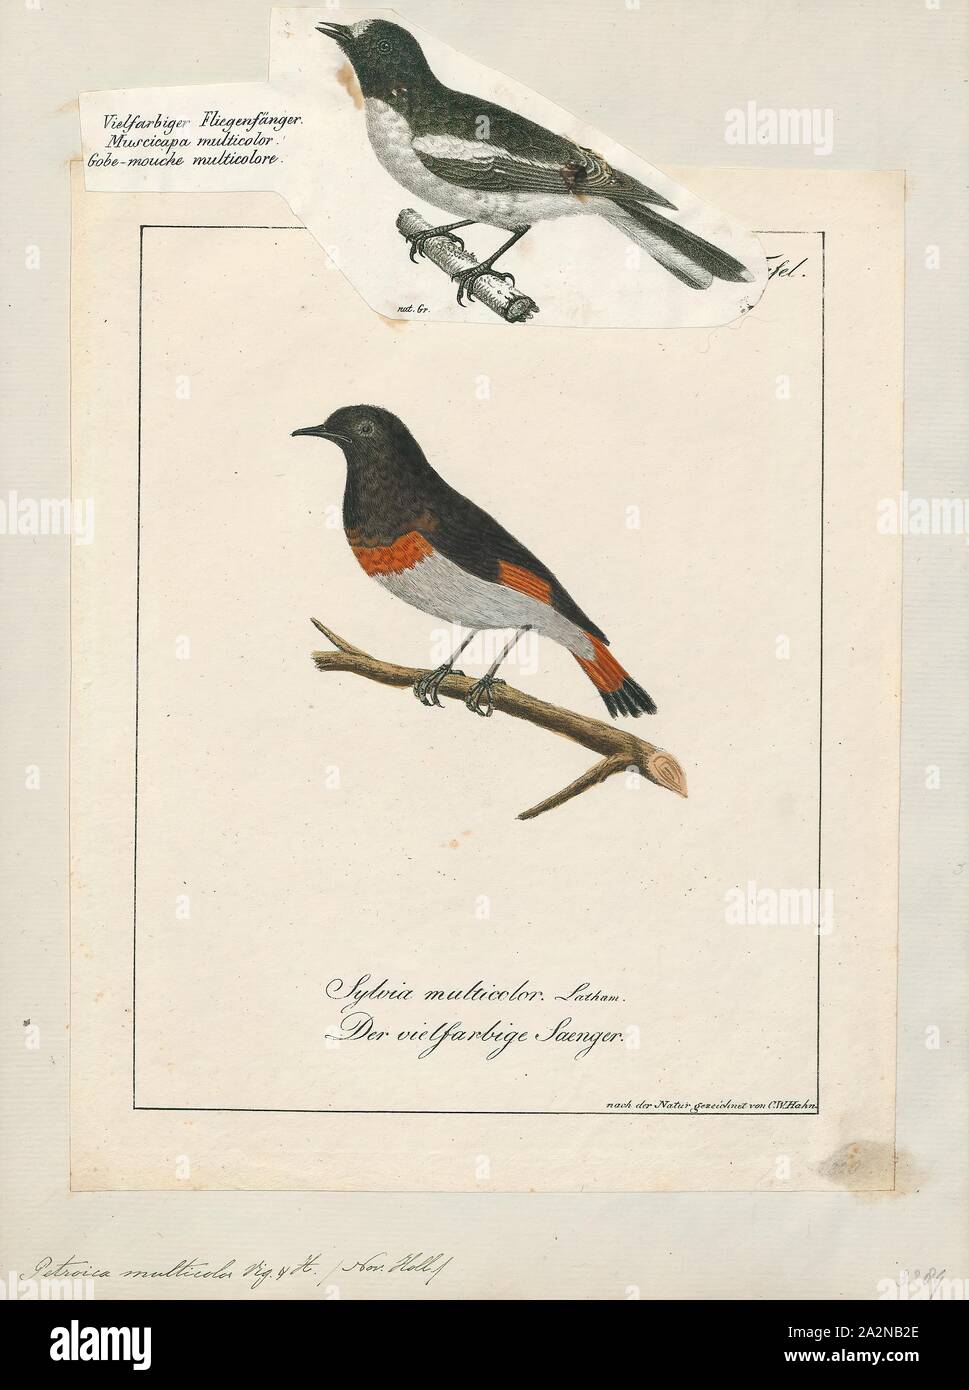 Petroica multicolor, Print, The Norfolk robin (Petroica multicolor), also known as the Norfolk Island scarlet robin or Norfolk Island robin, is a small bird in the Australasian robin family, Petroicidae. It is endemic to Norfolk Island, an Australian territory in the Tasman Sea, between Australia and New Zealand Stock Photo